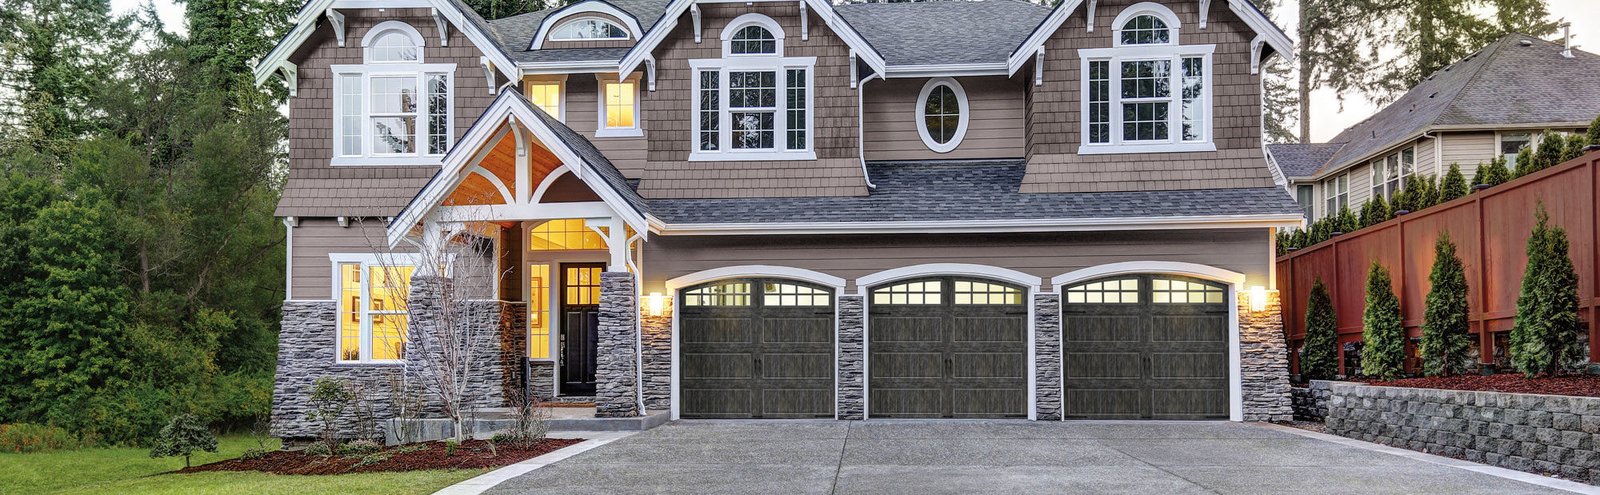 Why repairing a garage door yourself is not a wise idea.